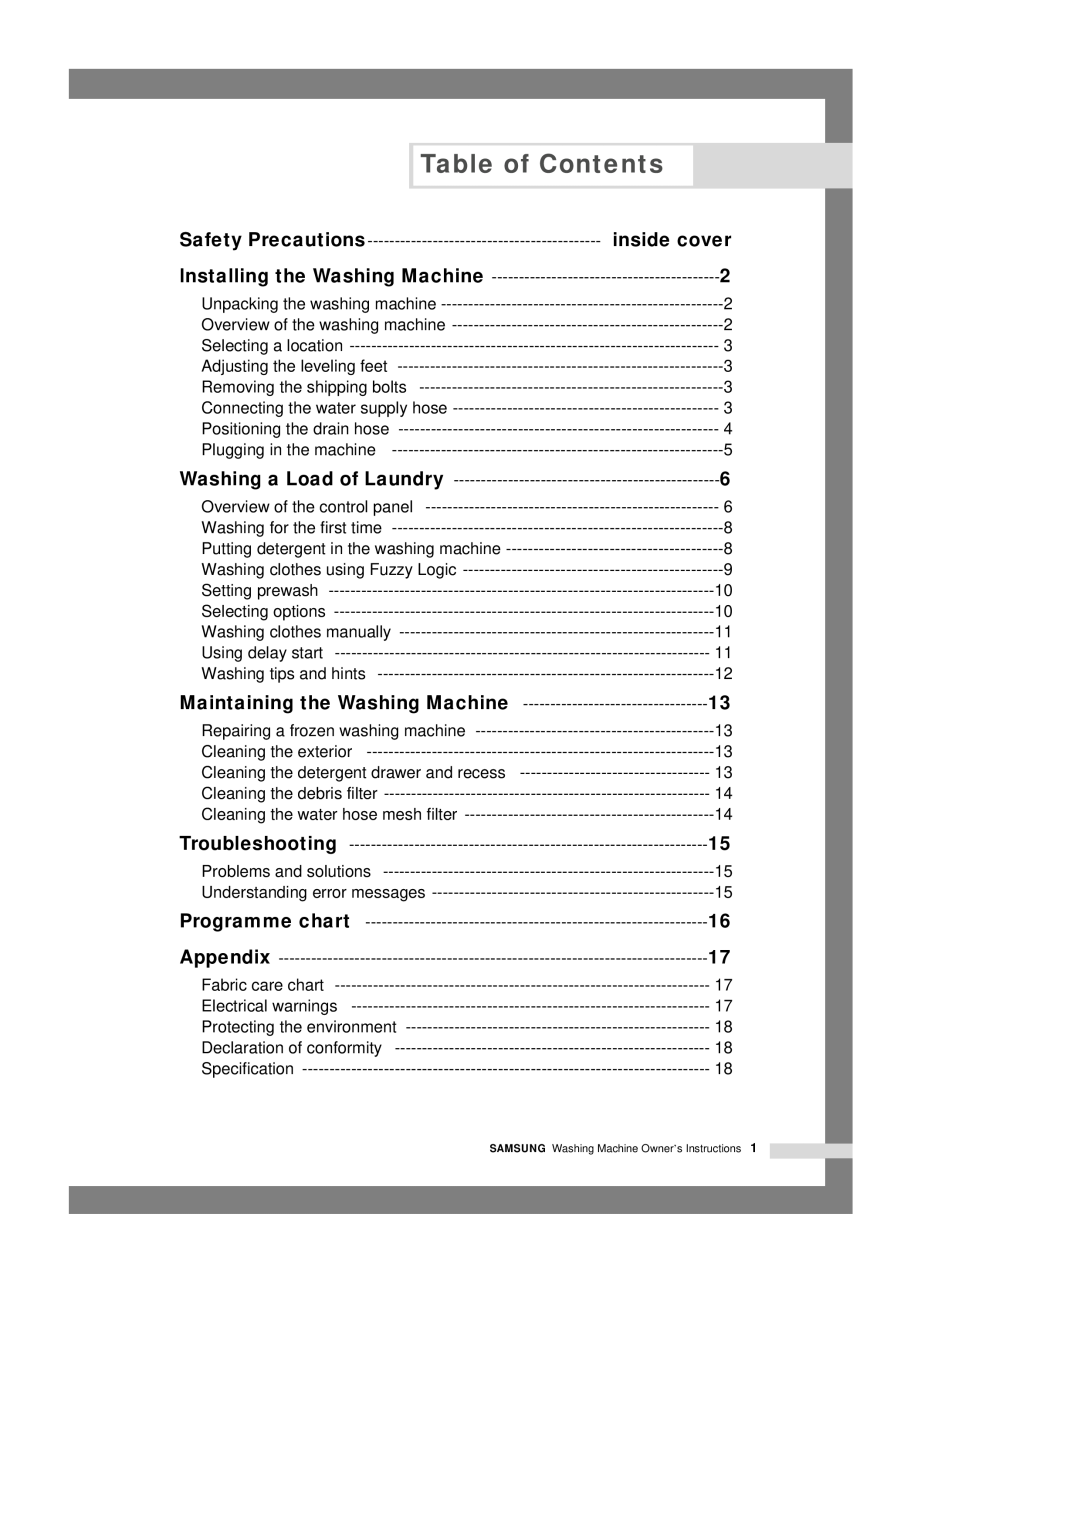 Samsung S805J, S1003J, S1005J, S803J manual Table of Contents, inside cover, Safety Precautions 